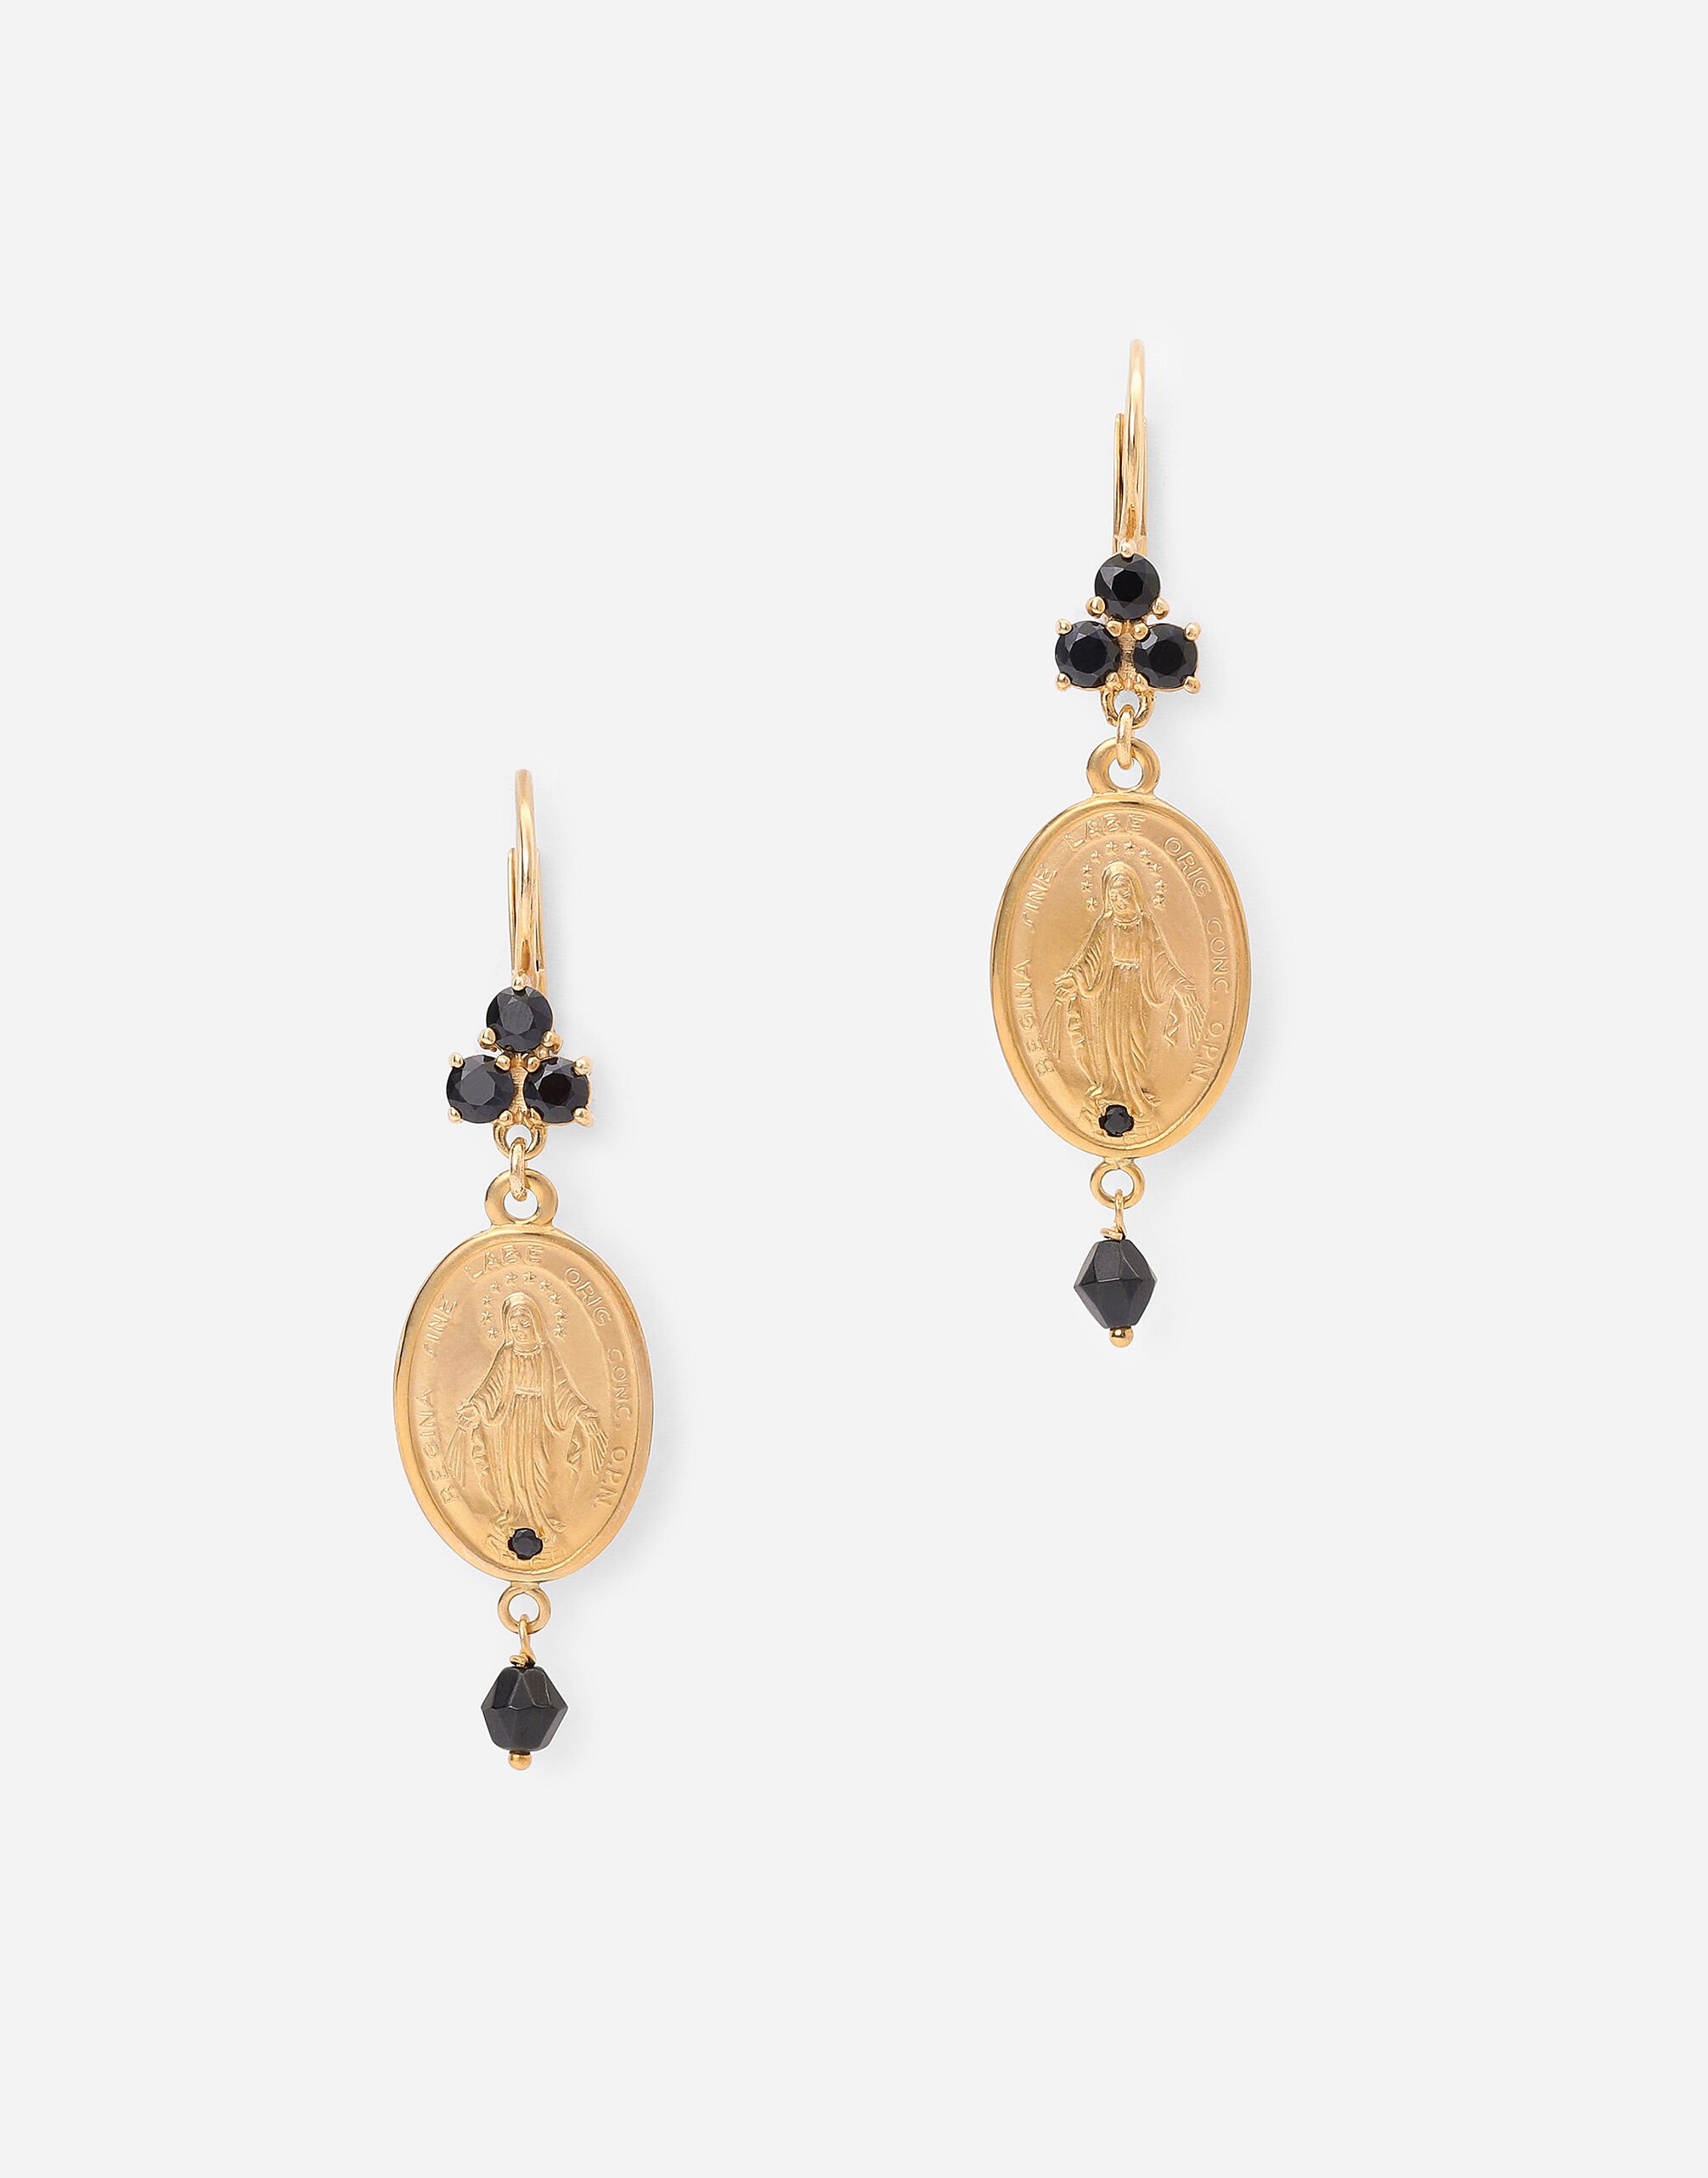 Dolce & Gabbana Tradition earrings in yellow 18kt gold with medals Black WWJS1SXR00S